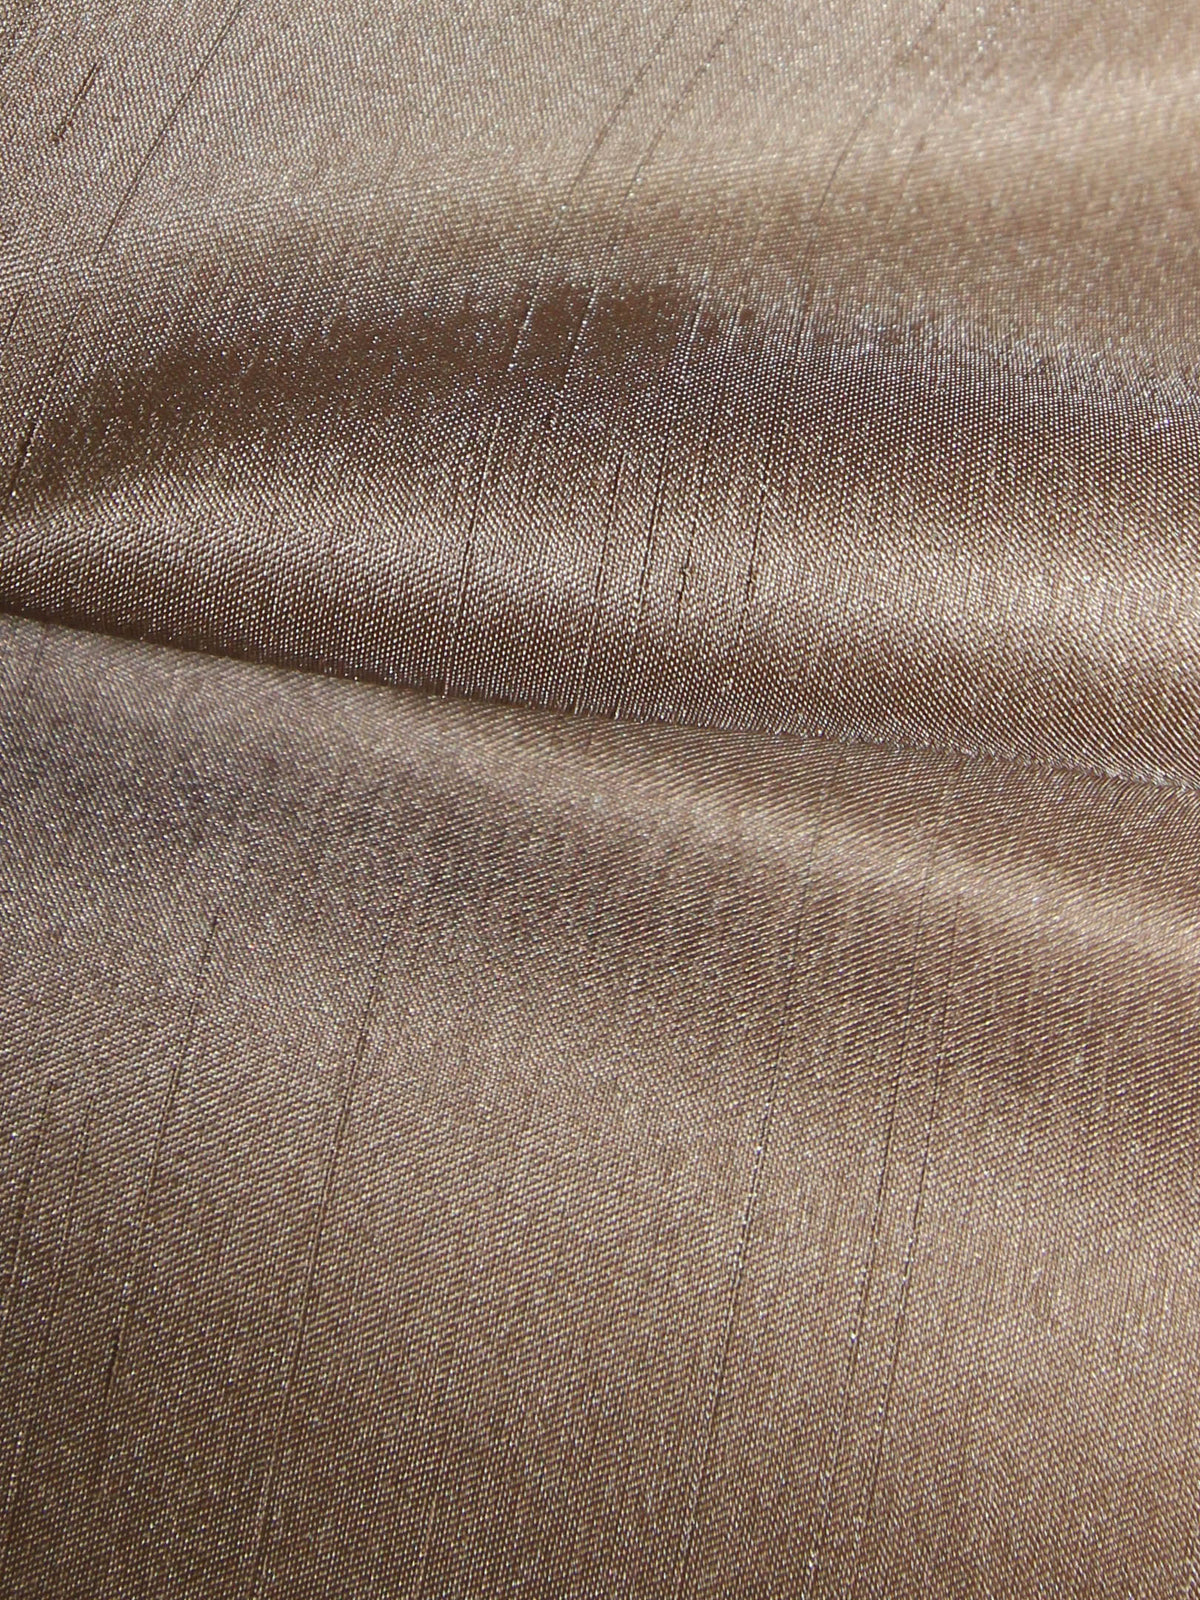 Taupe Polyester Satin Backed Dupion - Clarity